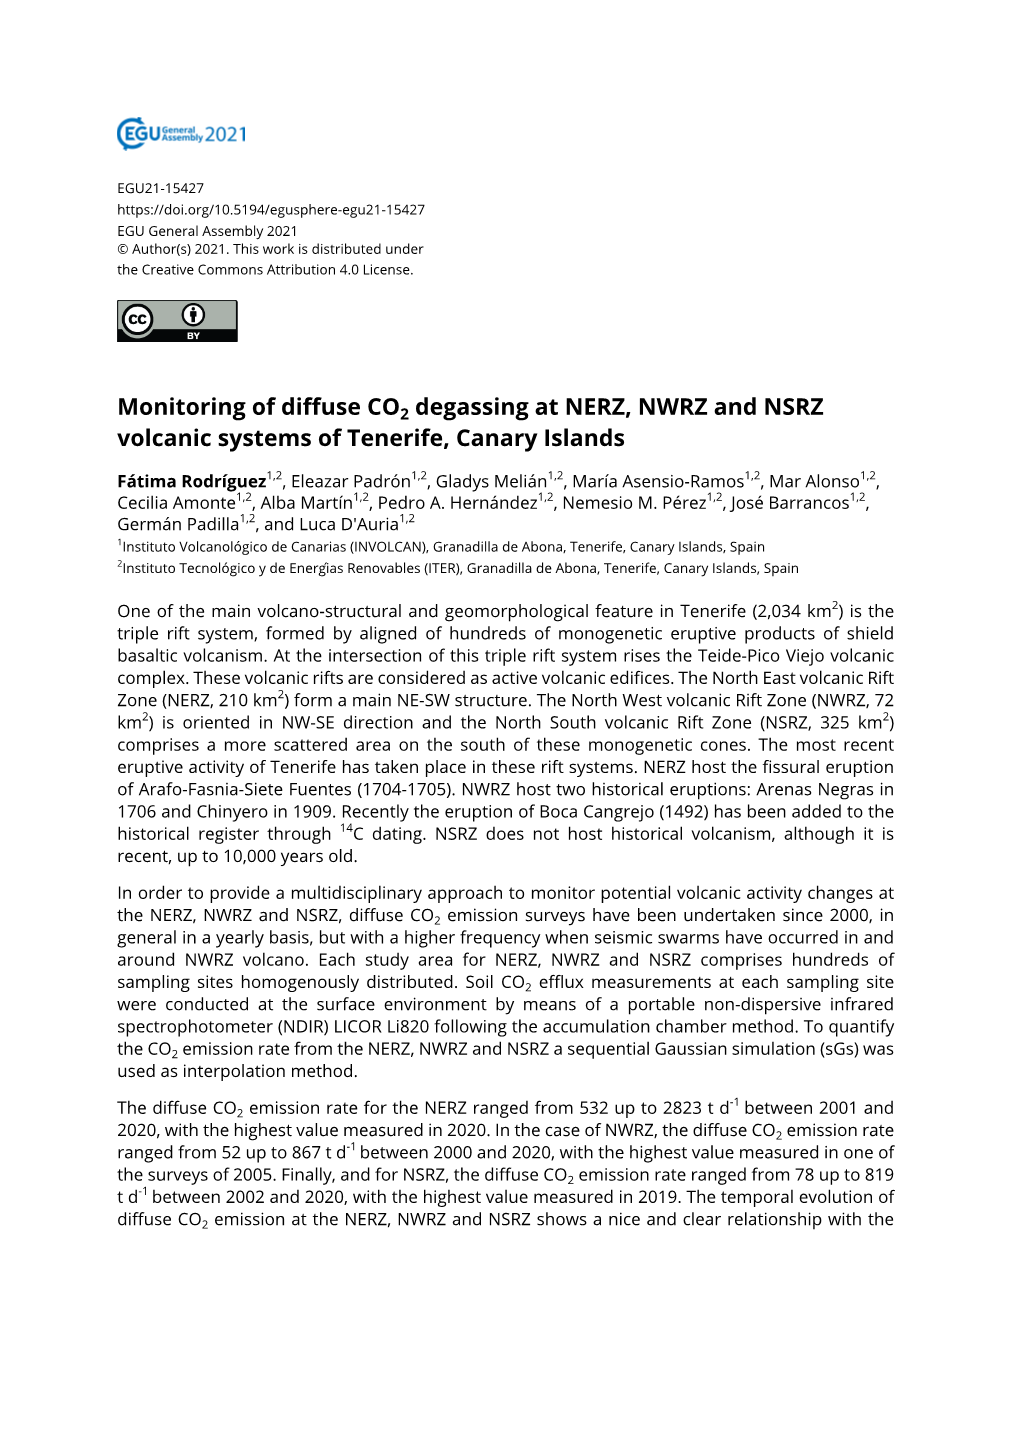 Monitoring of Diffuse CO2 Degassing at NERZ, NWRZ and NSRZ Volcanic Systems of Tenerife, Canary Islands